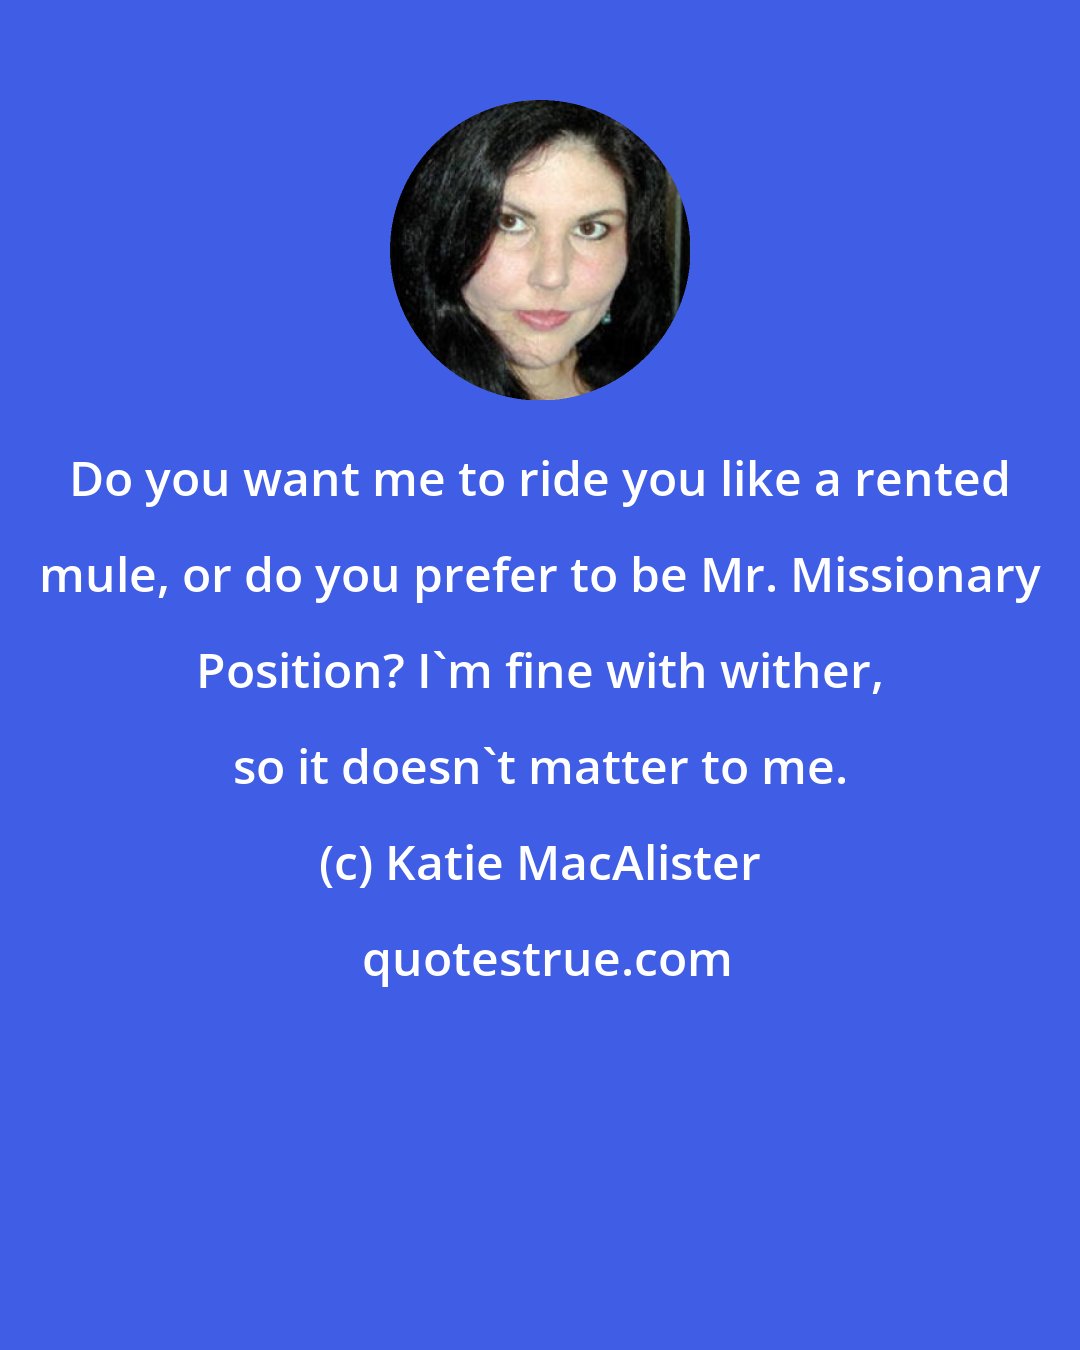 Katie MacAlister: Do you want me to ride you like a rented mule, or do you prefer to be Mr. Missionary Position? I'm fine with wither, so it doesn't matter to me.